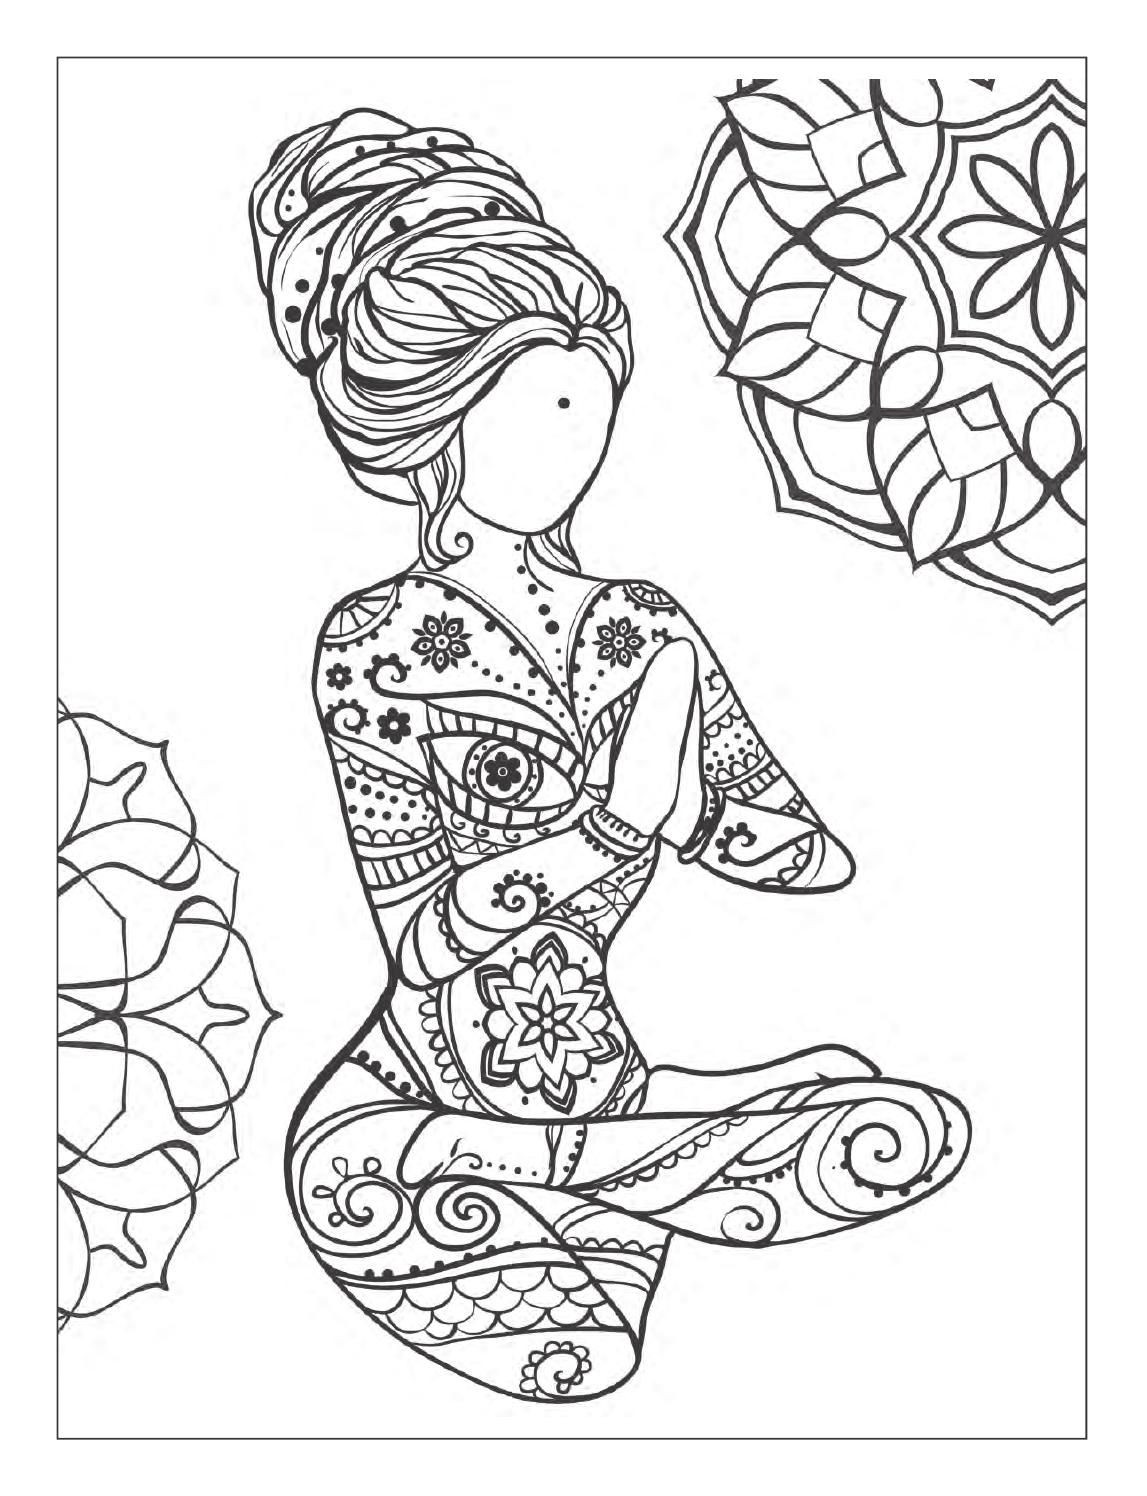 Coloring Books For Adults
 Mindfulness Coloring Pages Best Coloring Pages For Kids